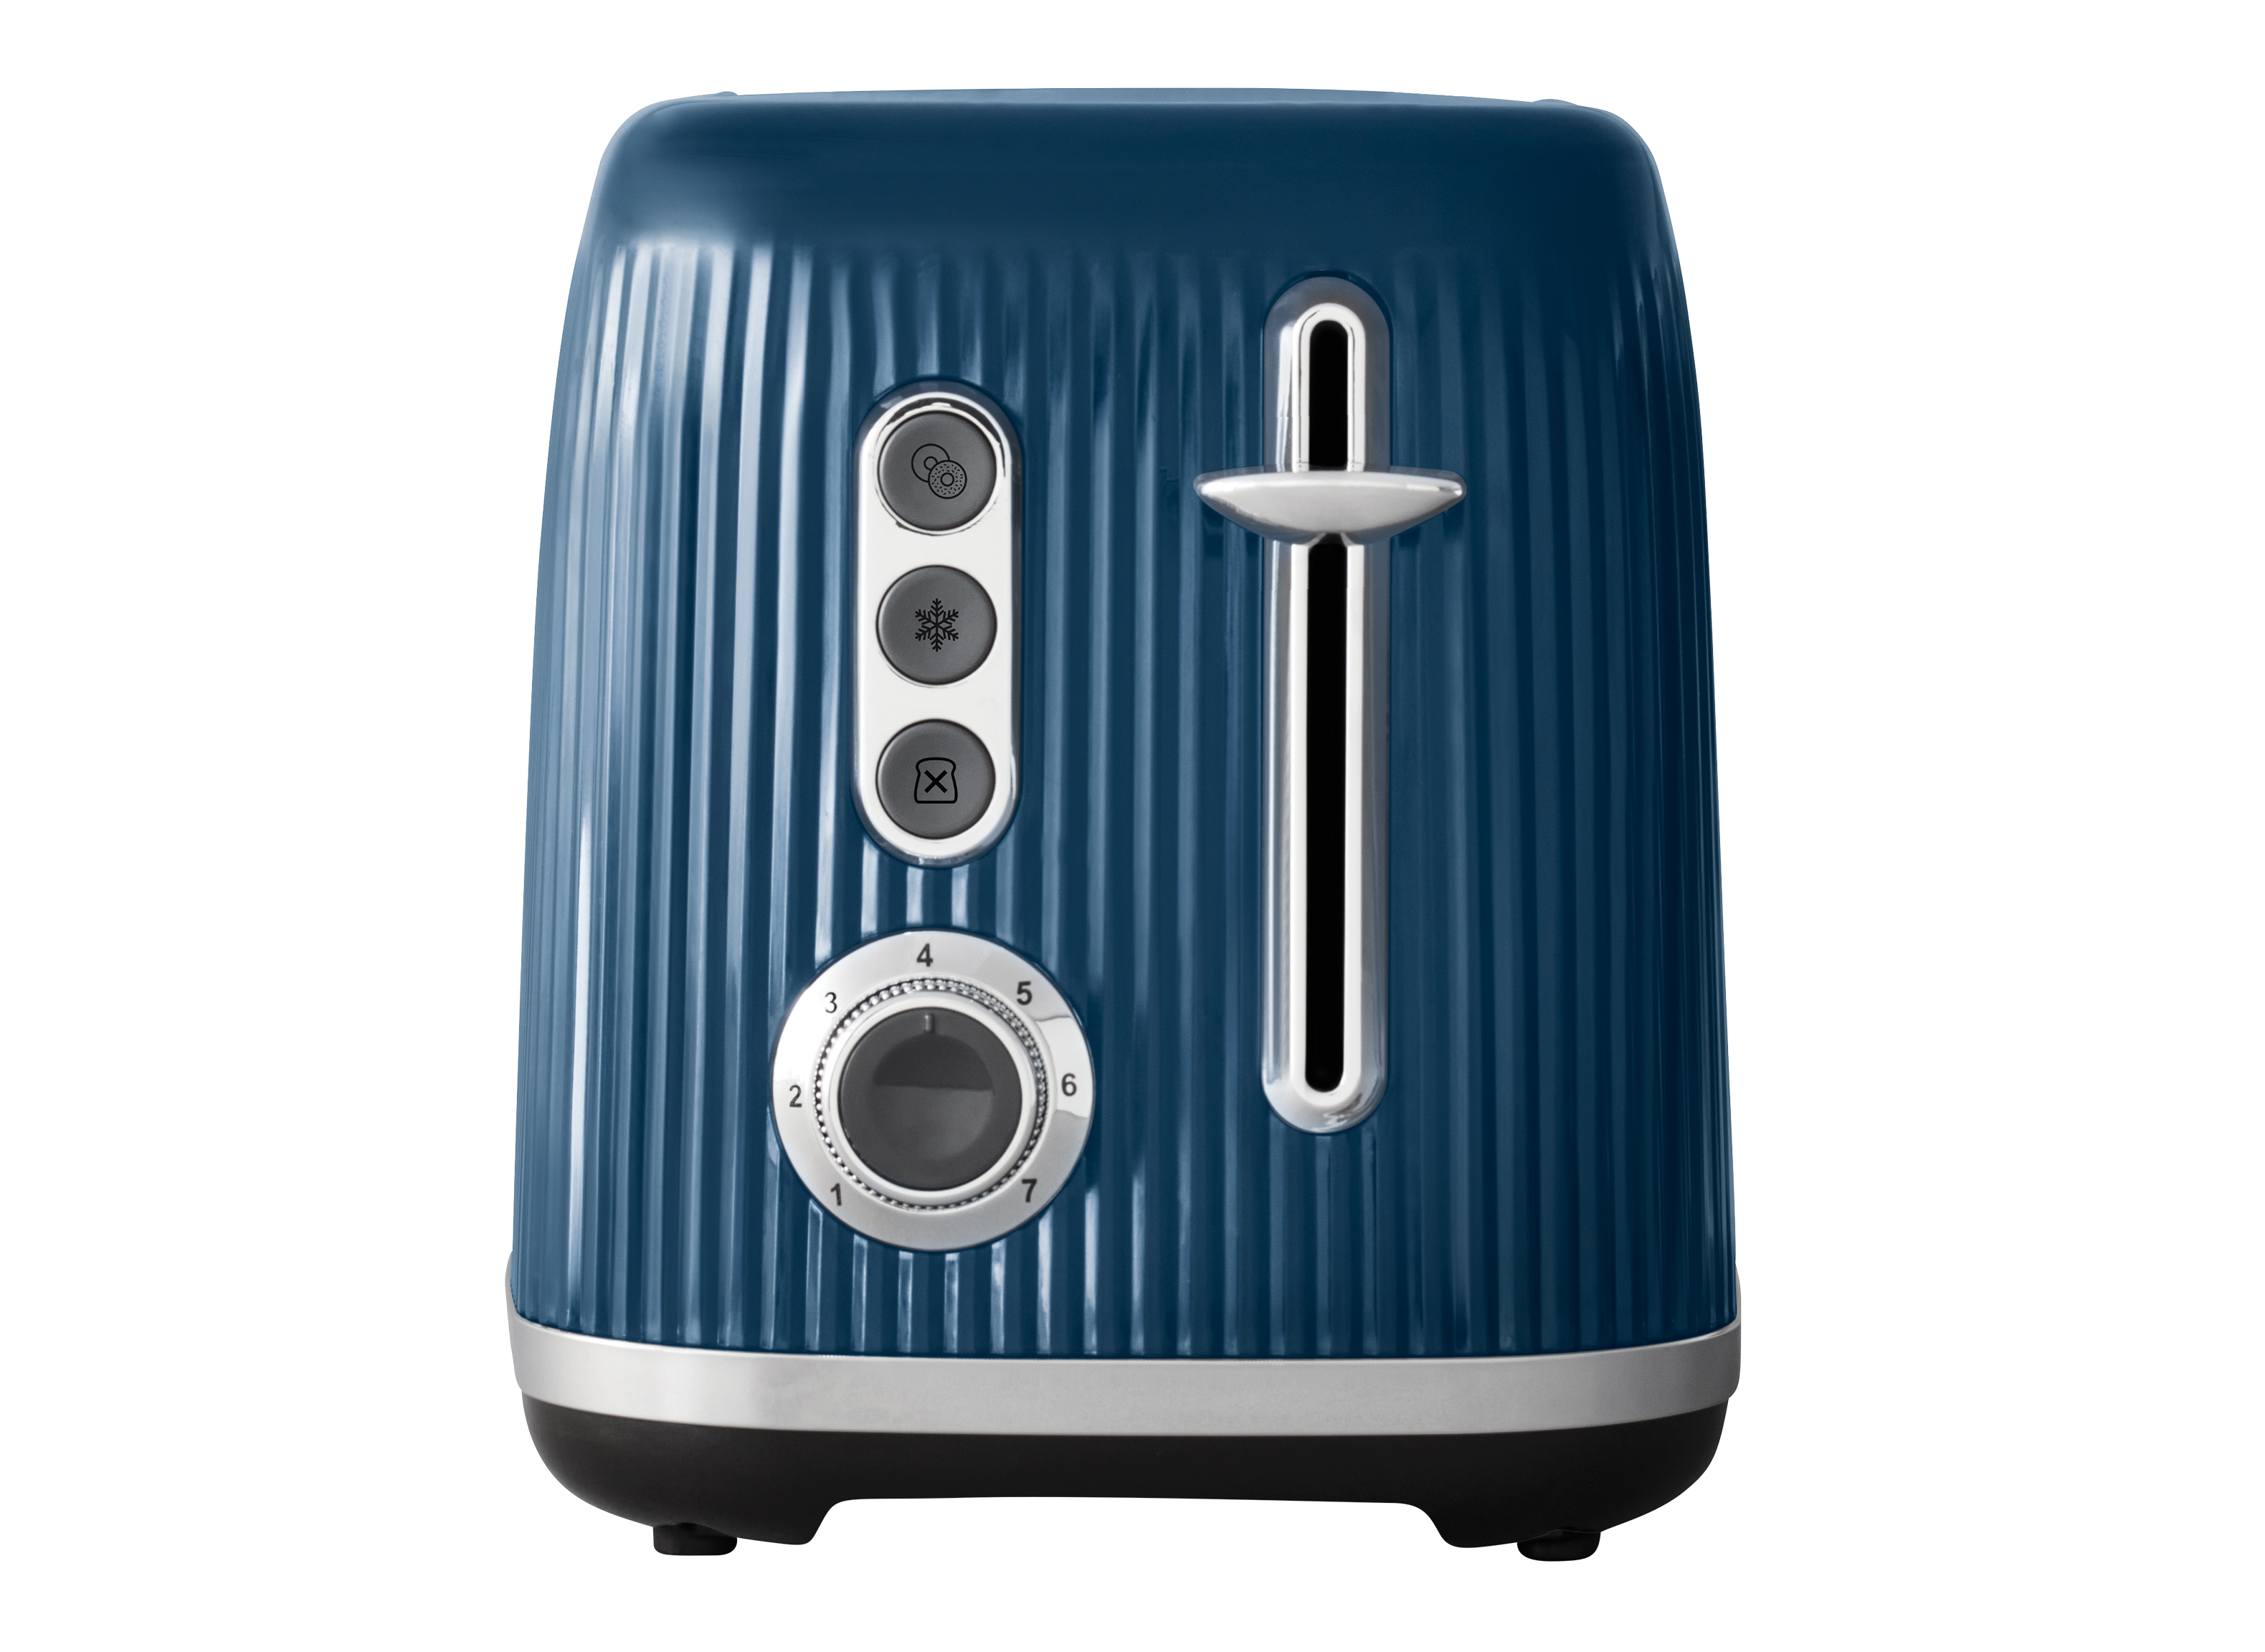 https://crdms.images.consumerreports.org/prod/products/cr/models/406545-2-slice-toasters-oster-impressions-collection-2-slice-wide-slot-toaster-10029664.png